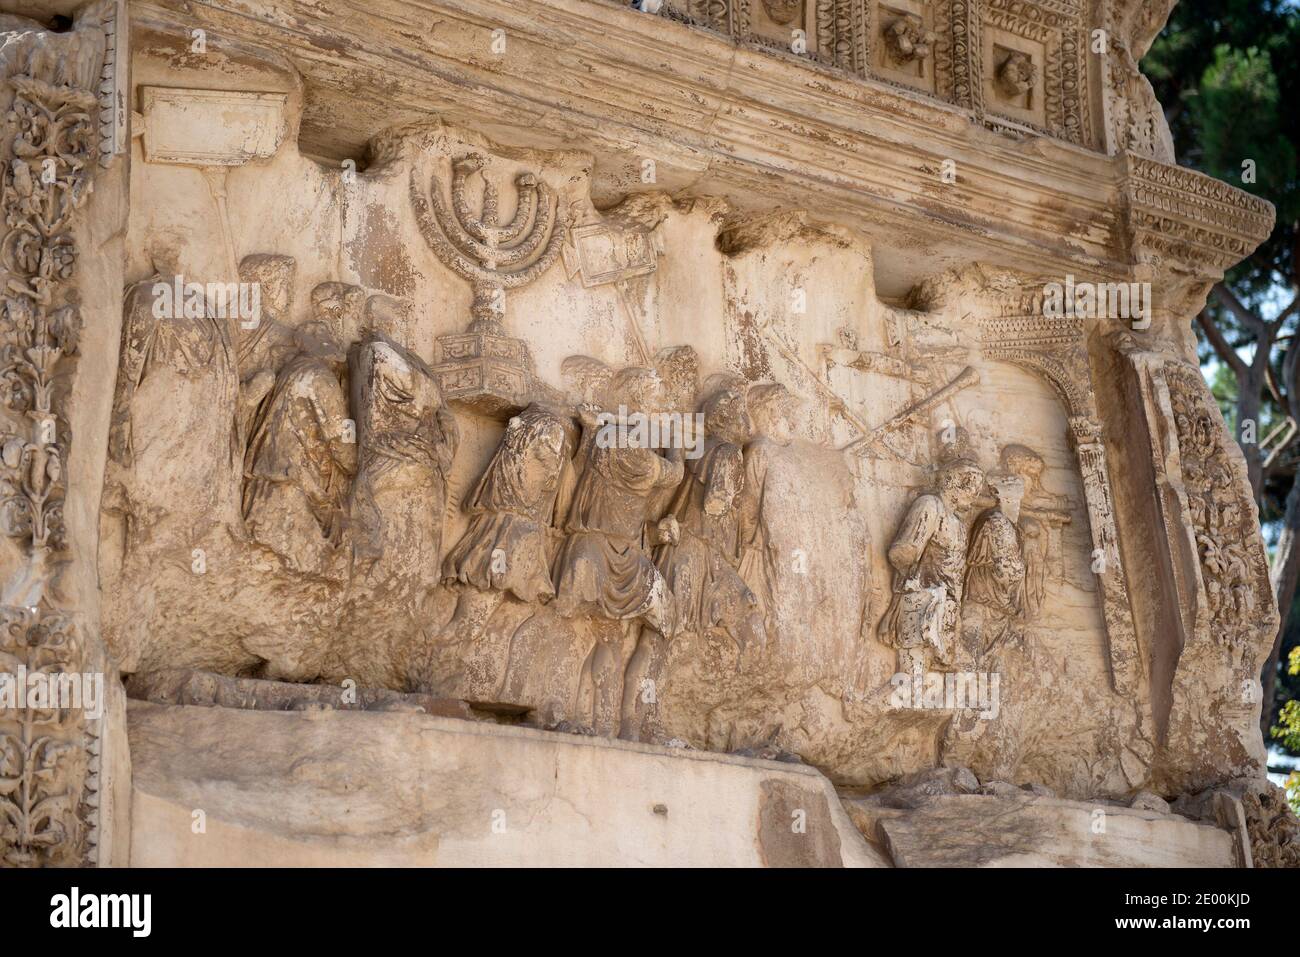 Detail of the Golden Menorah in the Arch of Titus, located on the Via Sacra, just to the south-east of the Roman Forum in Rome, Italy, which was built to commemorate Titus's victory in Judea, depicts a Roman victory procession with soldiers carrying spoils from the Temple, including the Menorah, which were used to fund the construction of the Colosseum, on Wednesday, October 23, 2013. It was constructed c. 82 AD by the Roman Emperor Domitian shortly after the death of his older brother Titus to commemorate Titus' victories, including the Siege of Jerusalem in 70 AD. The Arch is said to have pr Stock Photo